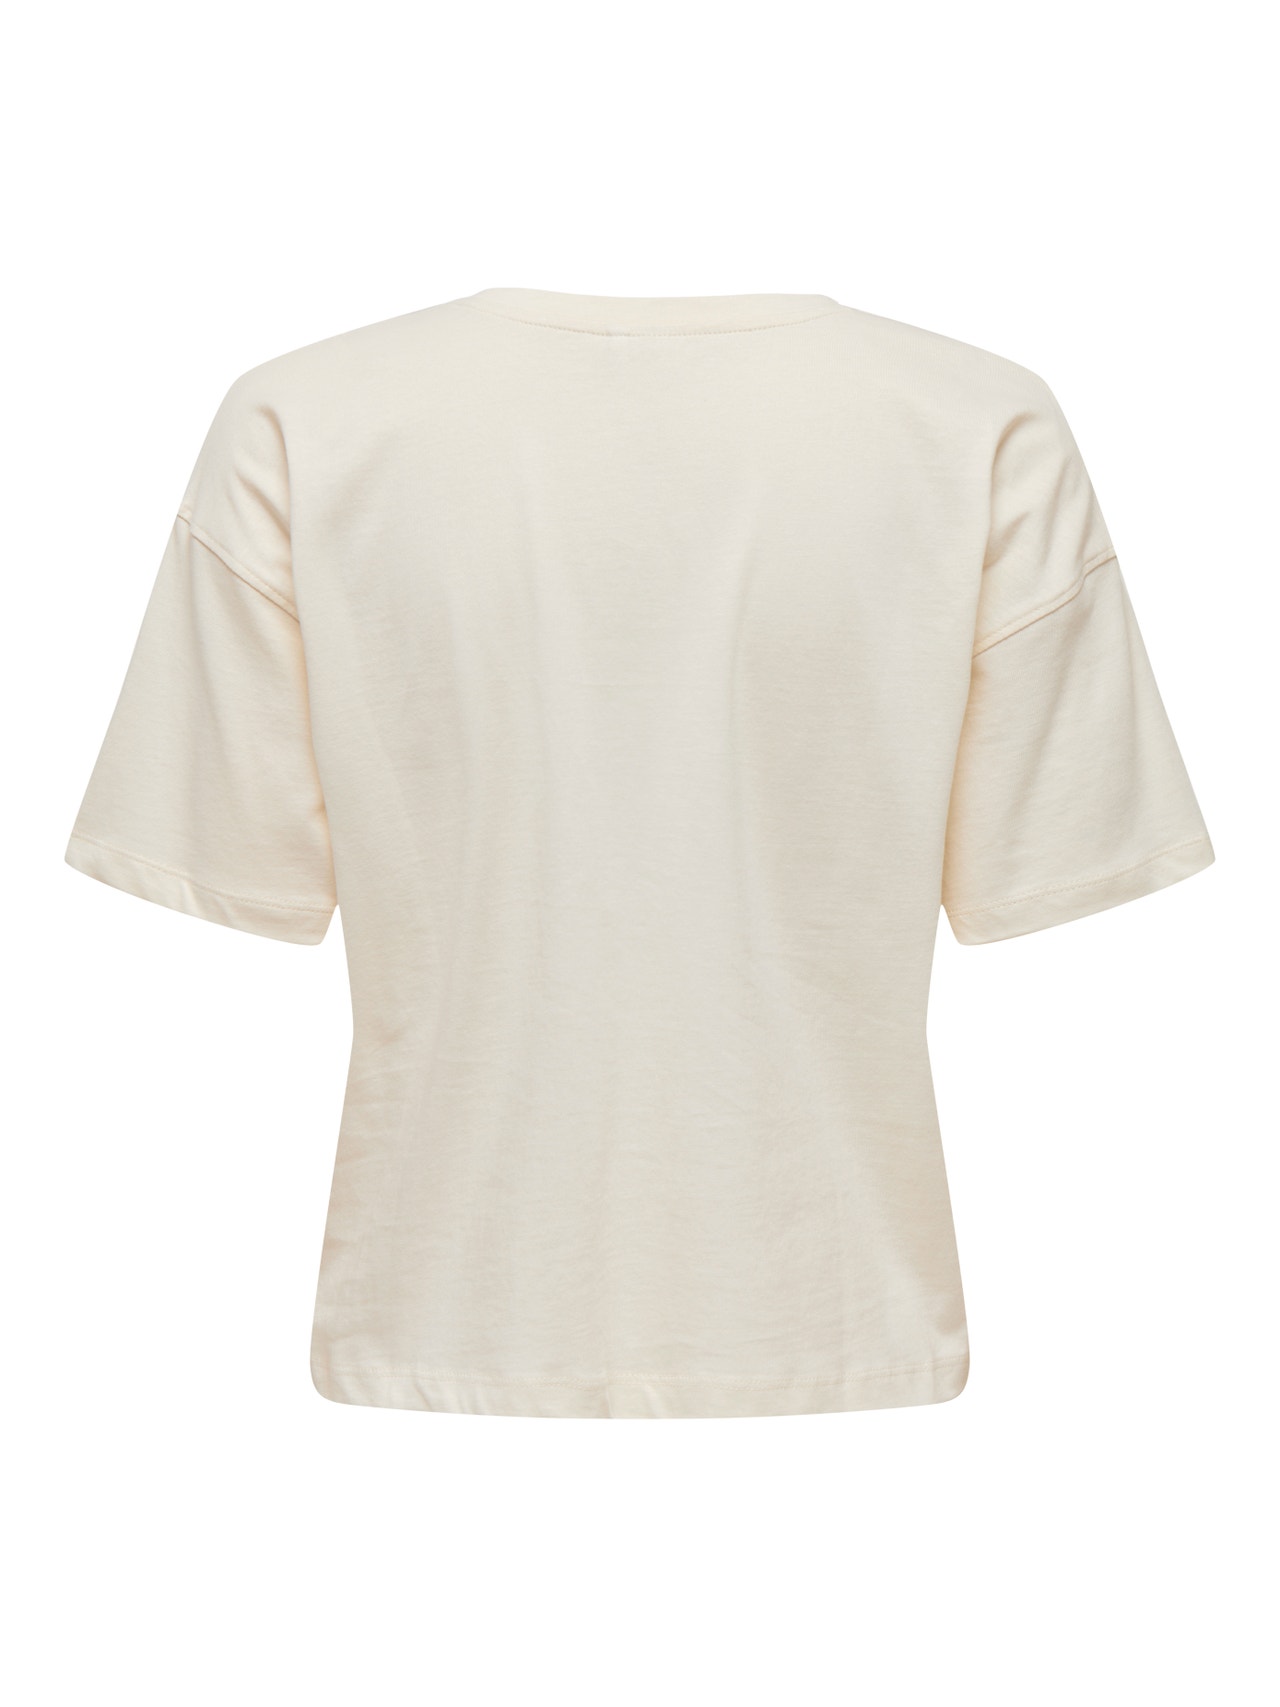 ONLY Loose Fit Round Neck Dropped shoulders T-Shirt -Whisper White - 15295915